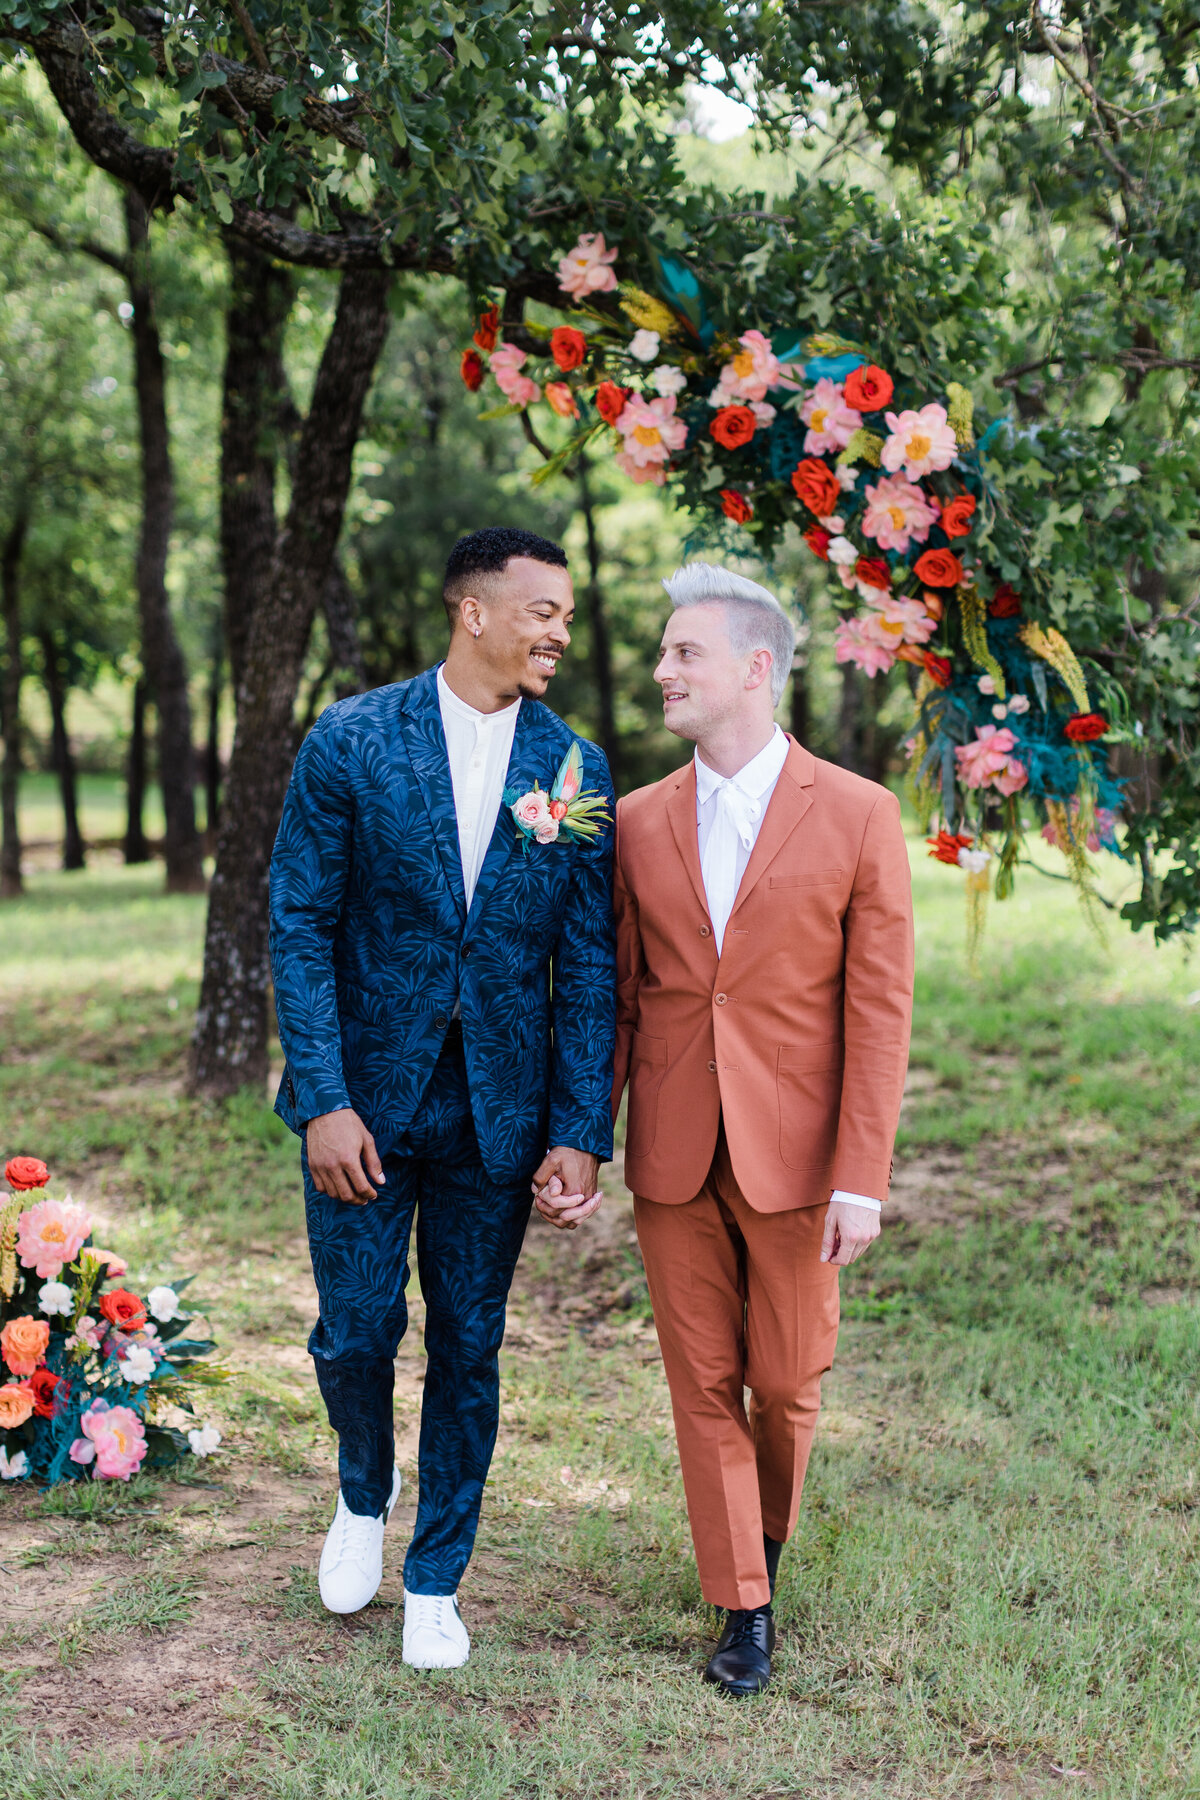 Portrait of two grooms walking through the woods on their wedding day in Dallas, Texas. The groom on the right is wearing a dark orange suit while the groom on the left is wearing an intricately patterned blue floral suit with a boutonniere. Above and to the side of them are large, colorful floral arrangements.